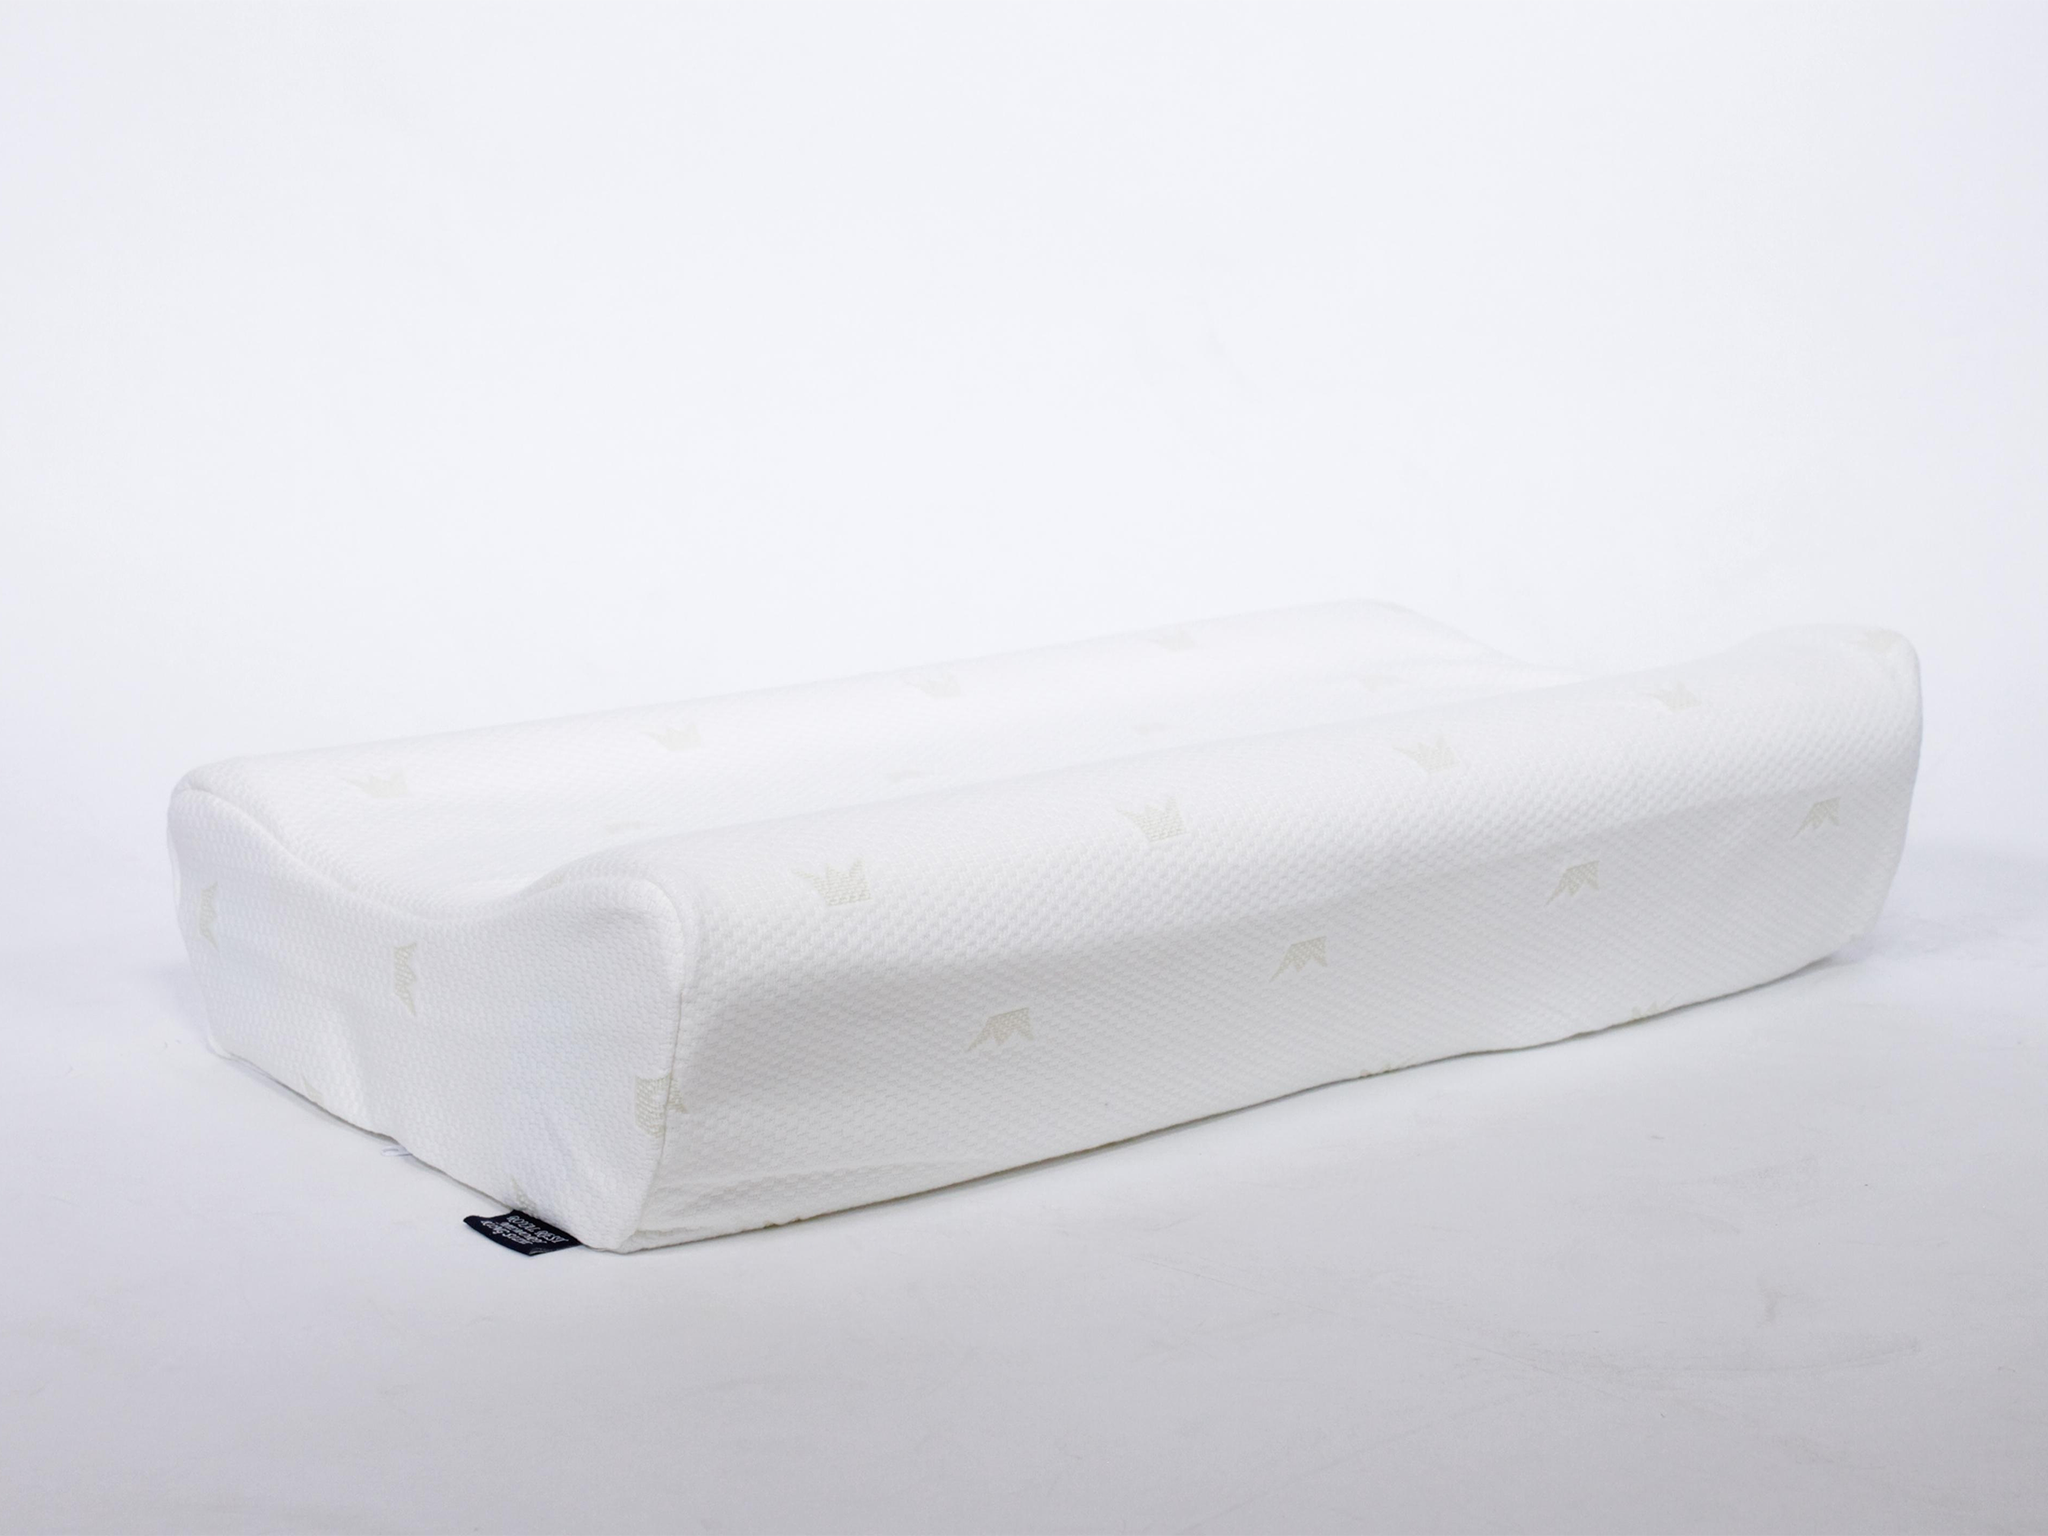 Back In Action royal rest pillow, memory foam